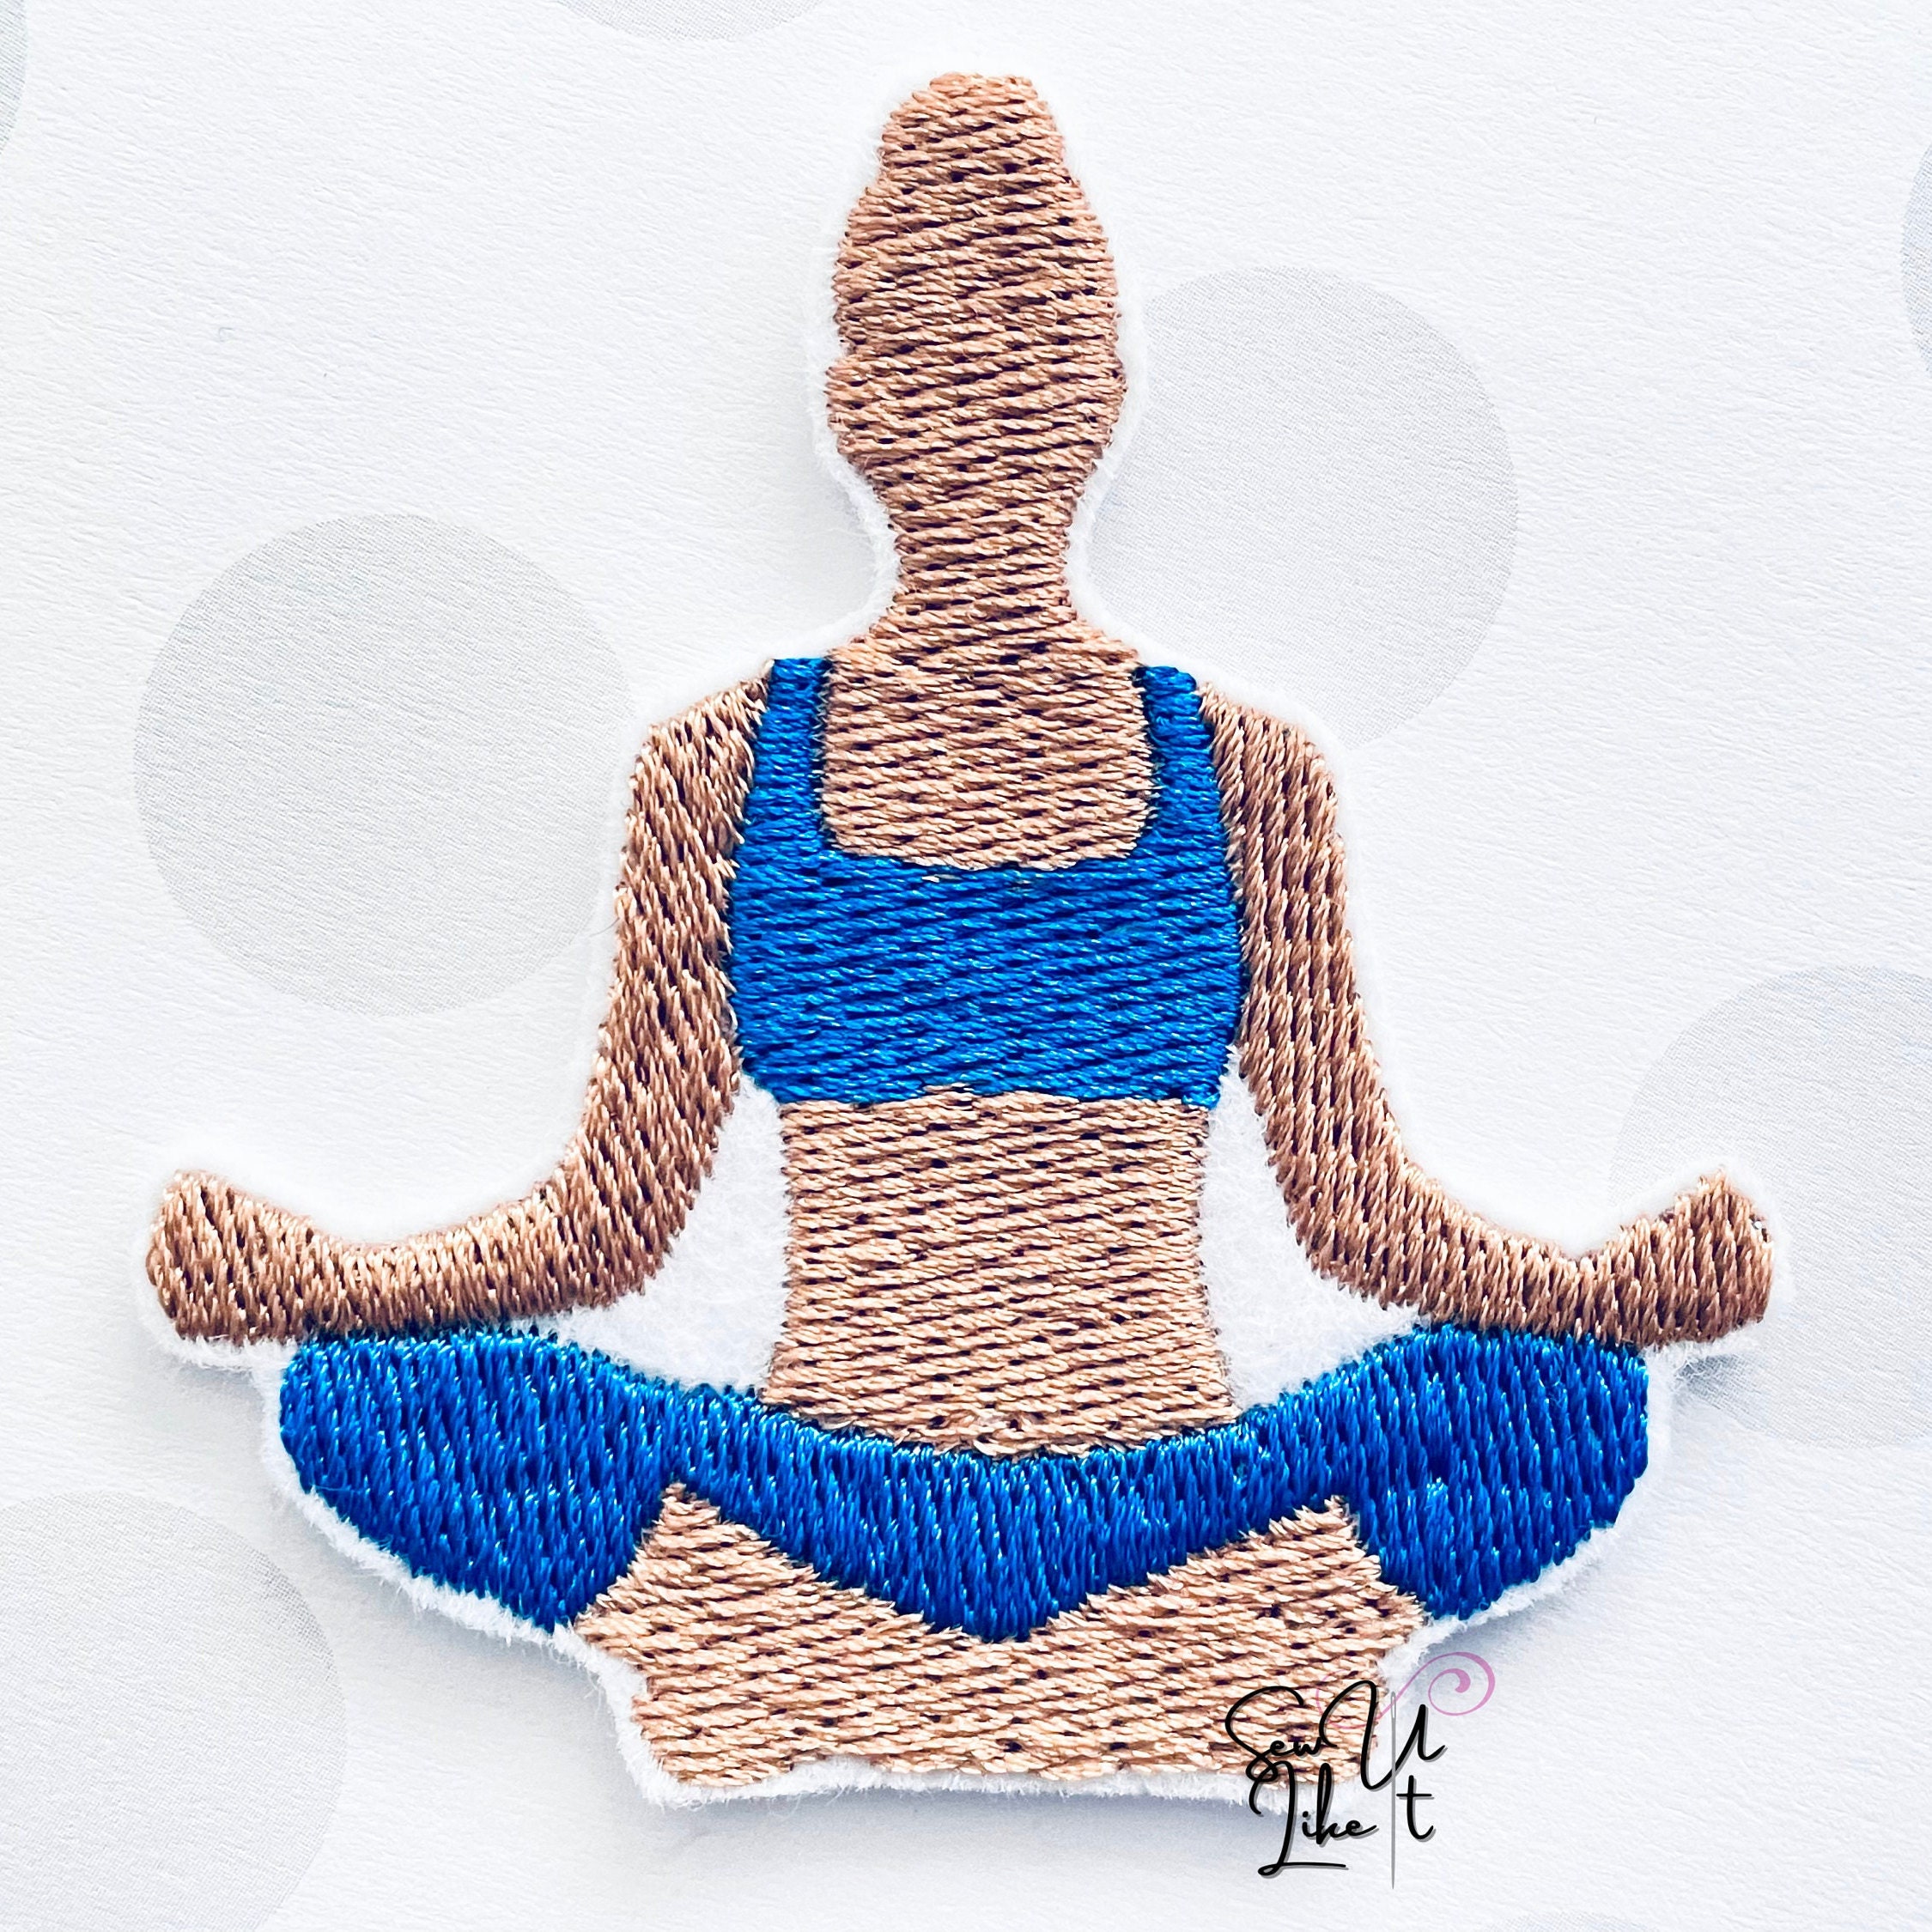 Yoga Woman Pose Embroidered Patch, Iron on Patch, Sew on Patch, Appliqué,  Iron on Badge -  Canada